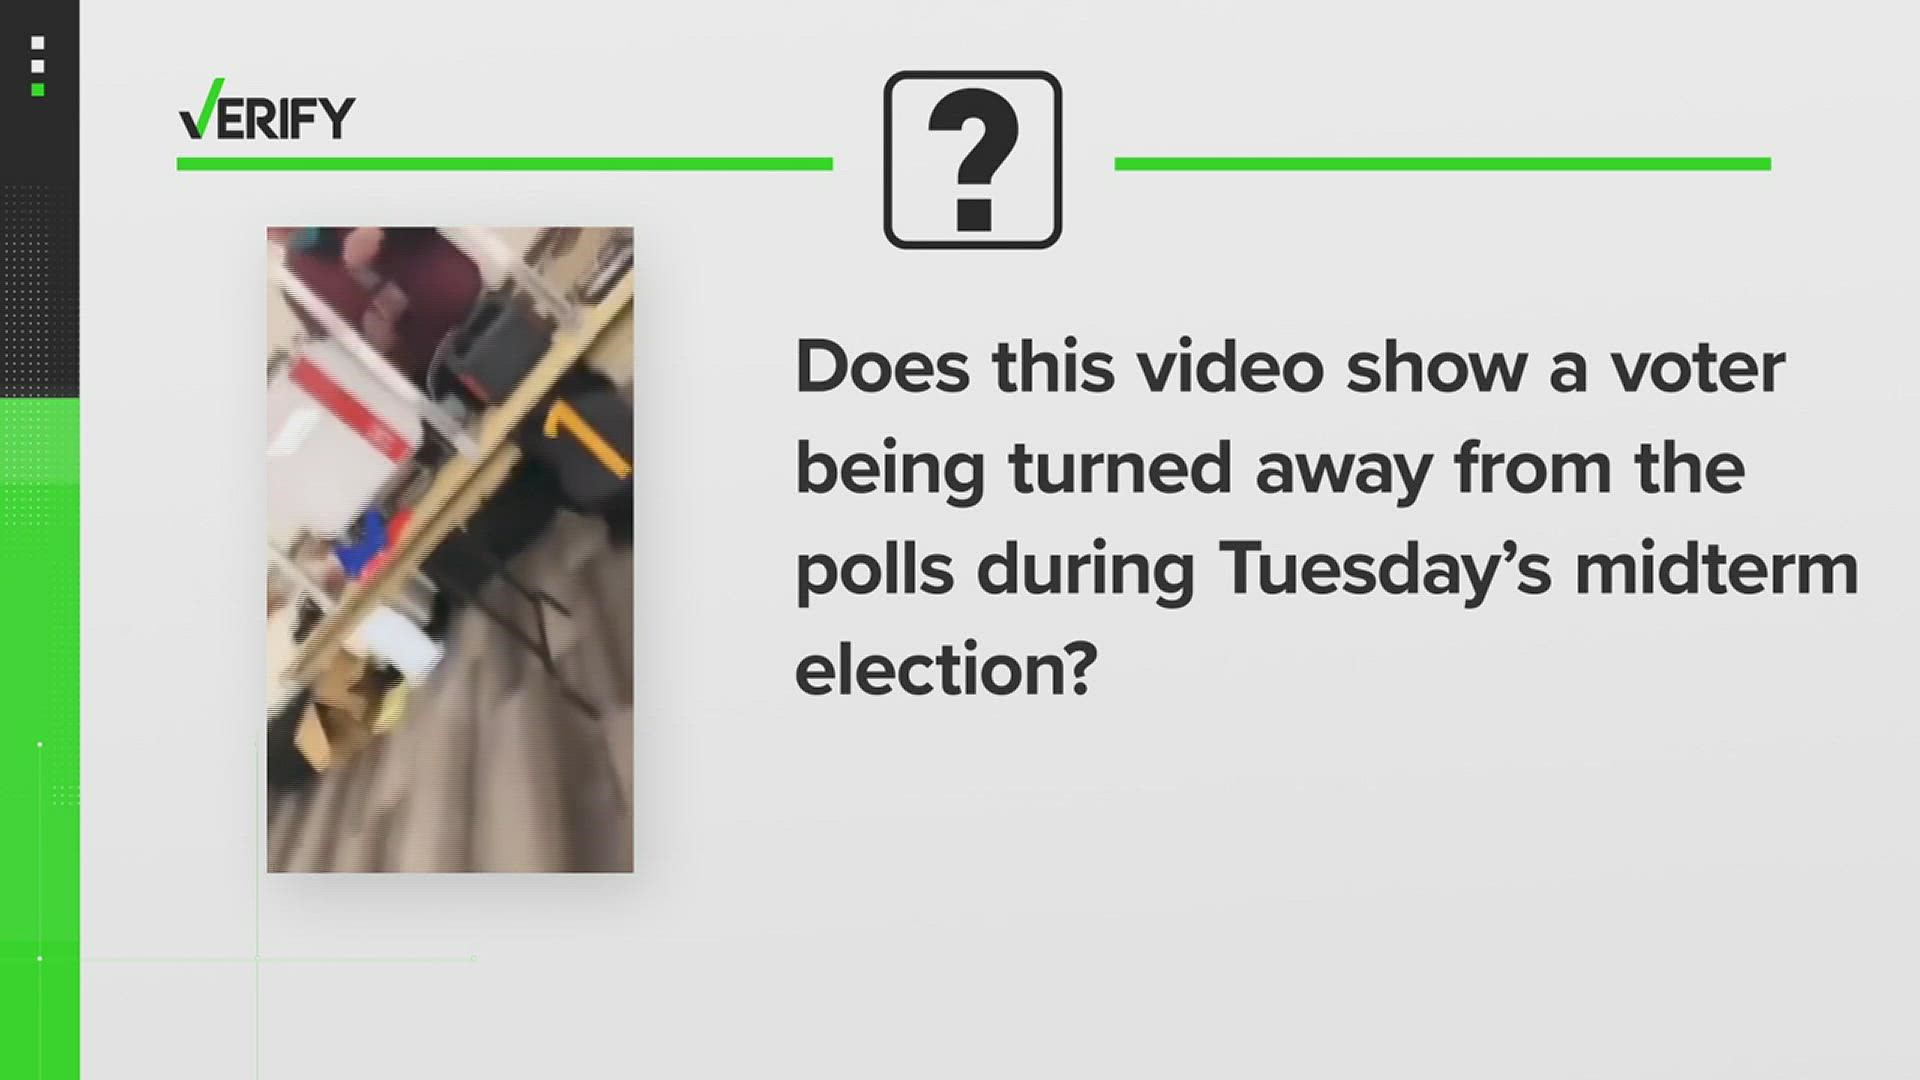 The video was taken at a Texas polling place in March 2022, not during the November midterm election.